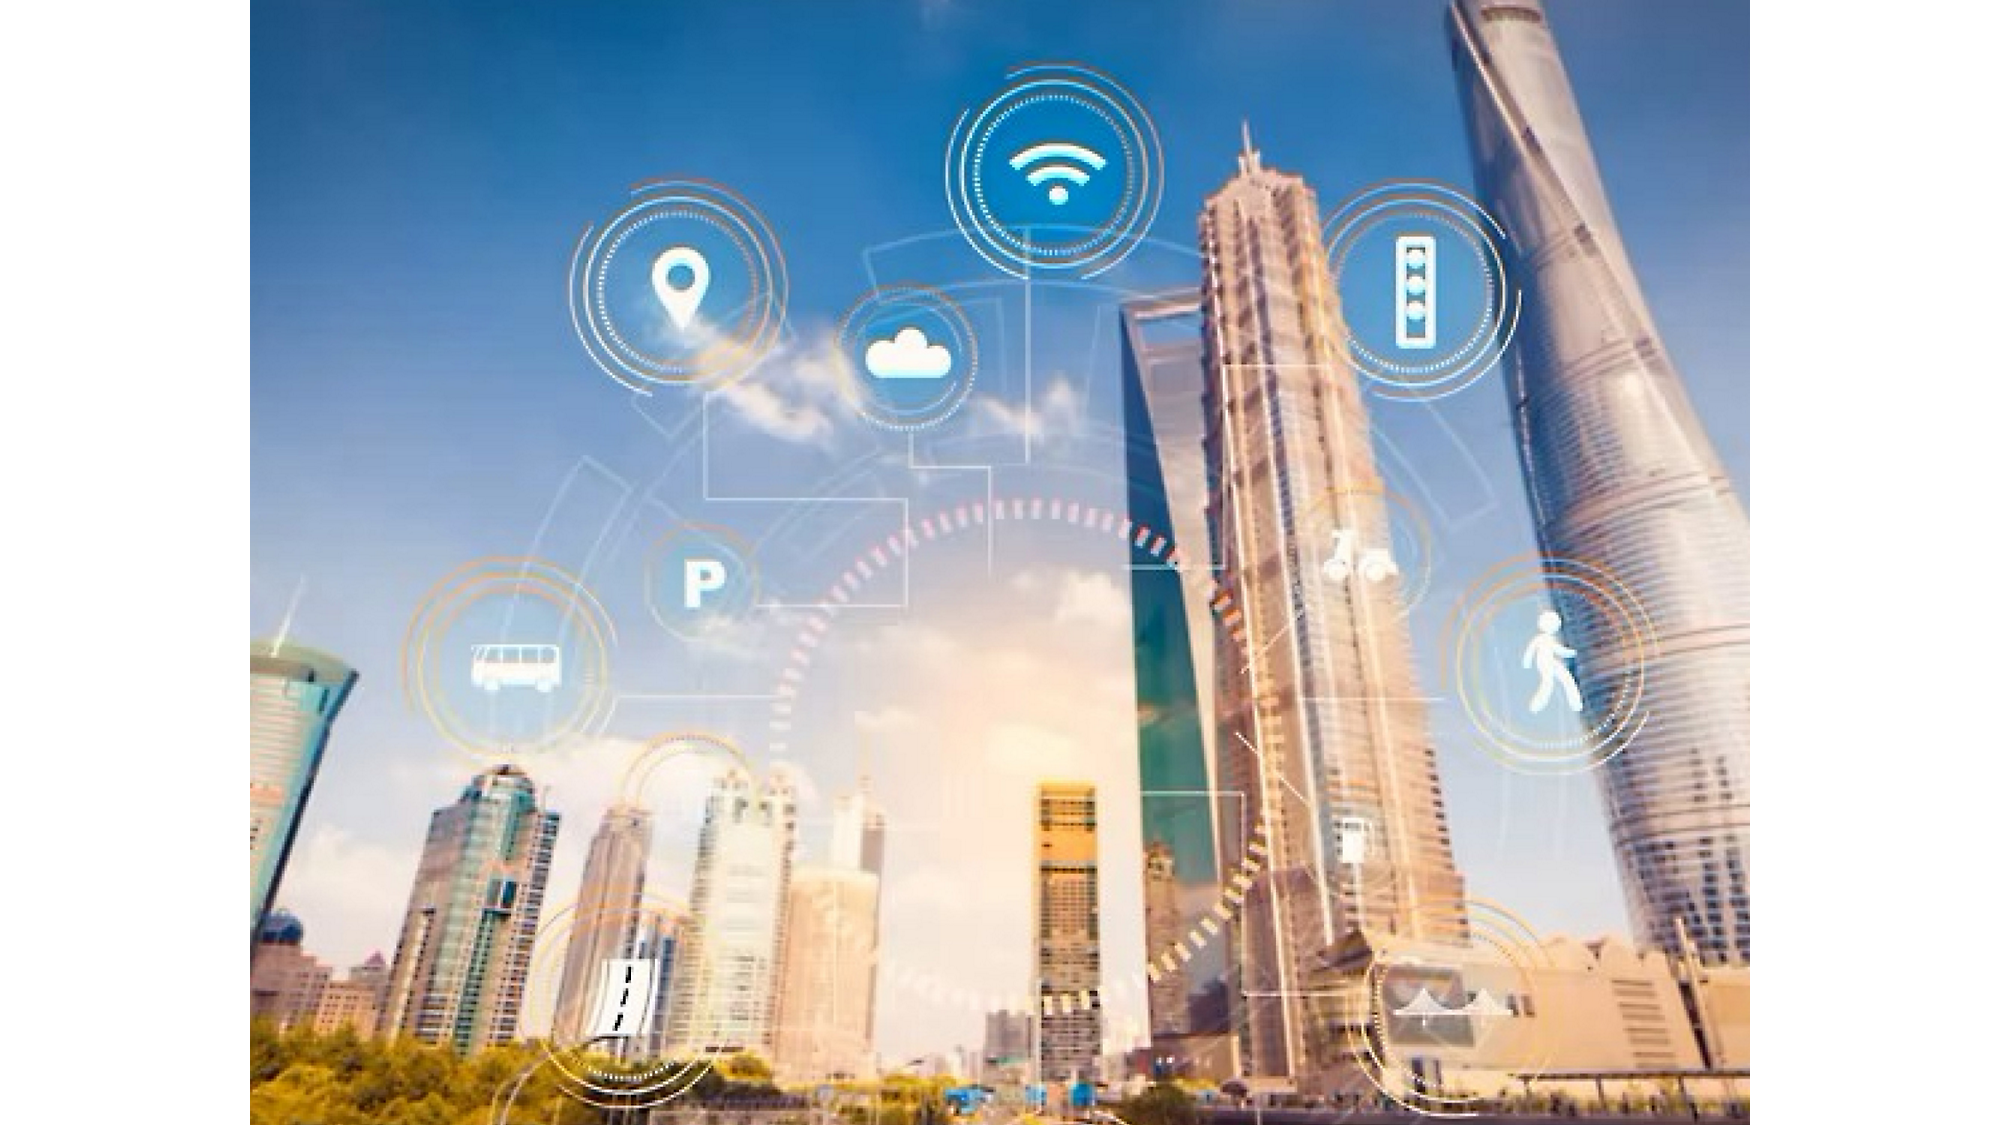 Illustration of a smart city with digital icons representing wi-fi, cloud computing, and other technologies with skyscrapers.